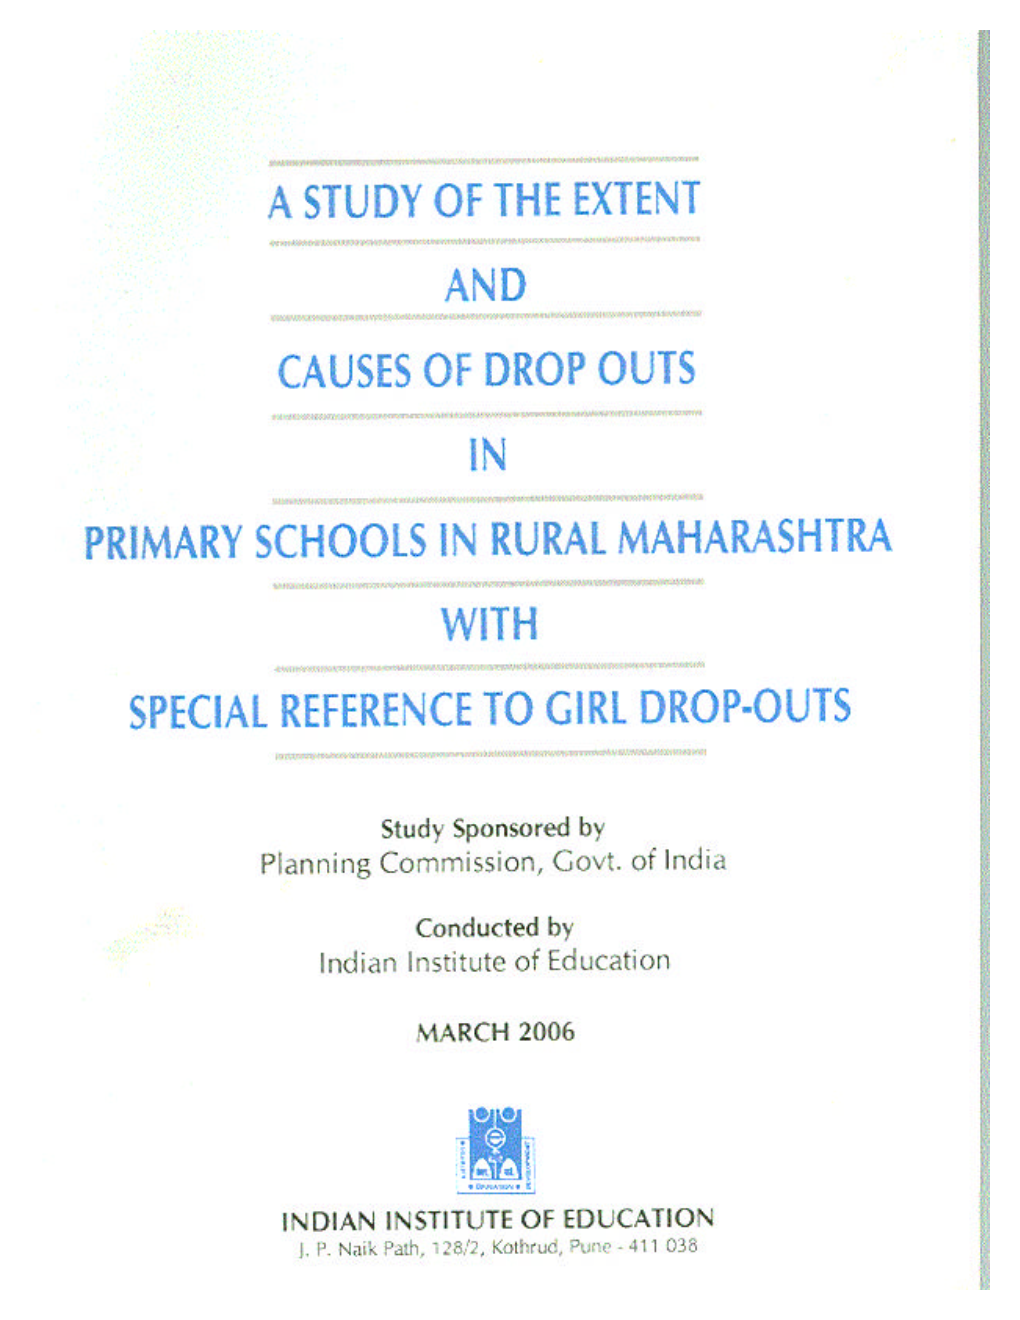 A Study of the Extent and Causes of Drop Outs in Primary Schools in Rural Maharashtra with Special Reference to Girl Drop-Outs